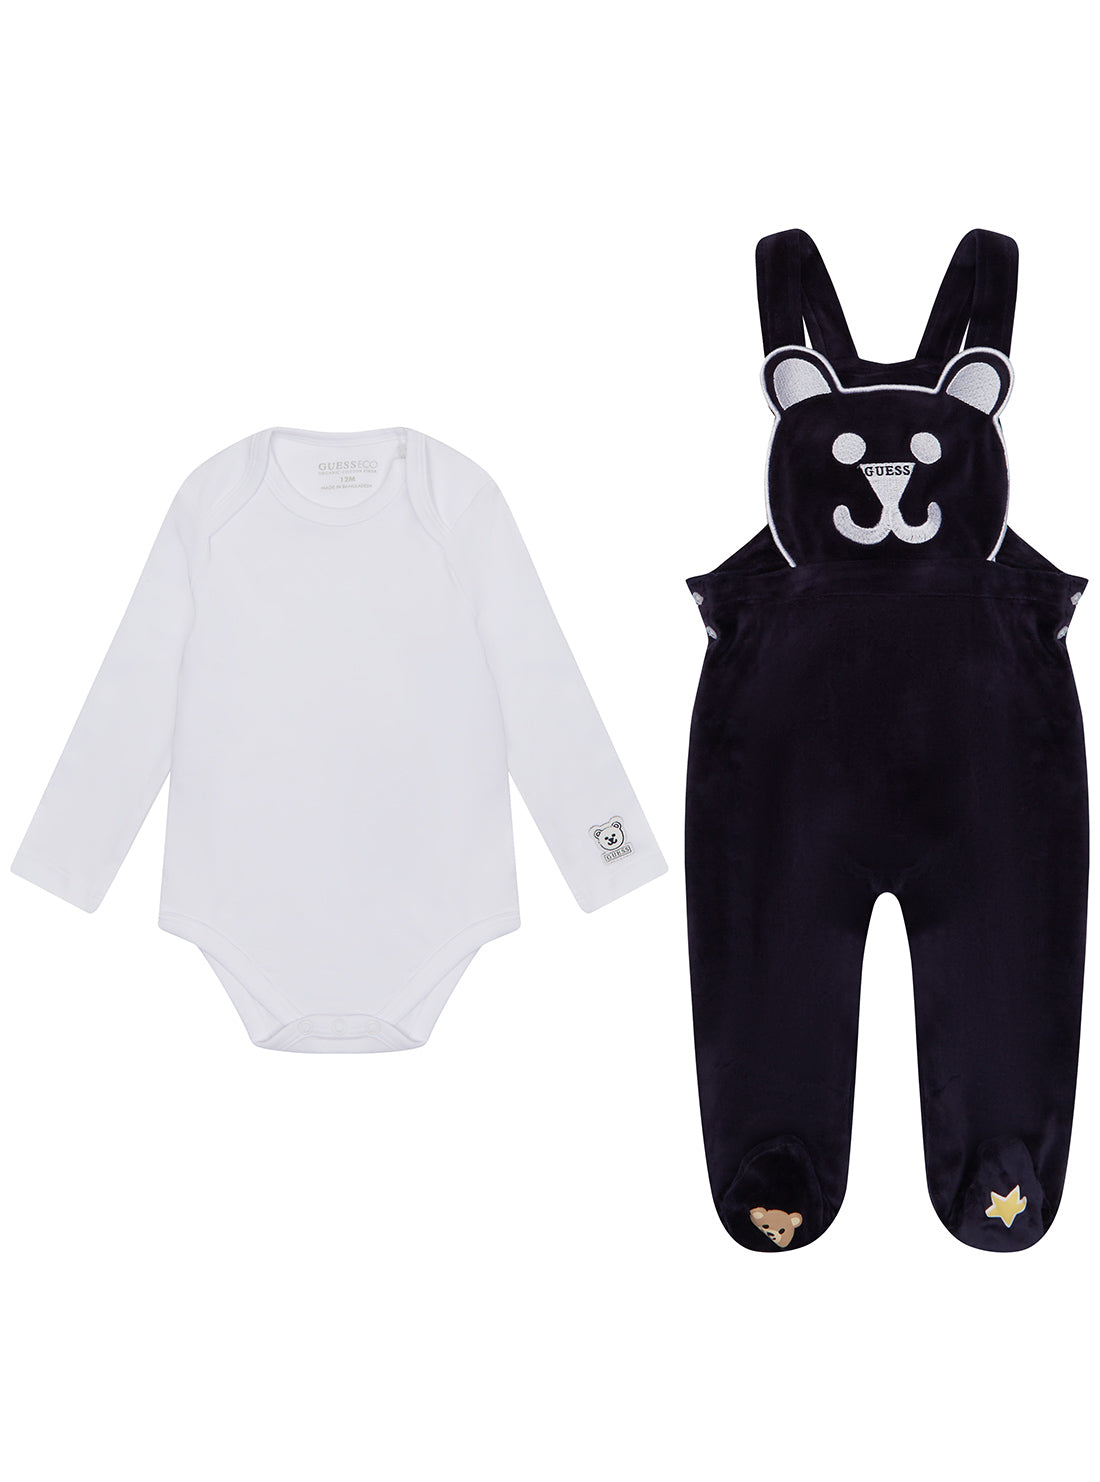 GUESS White Bodysuit and Bear Overall Set front view